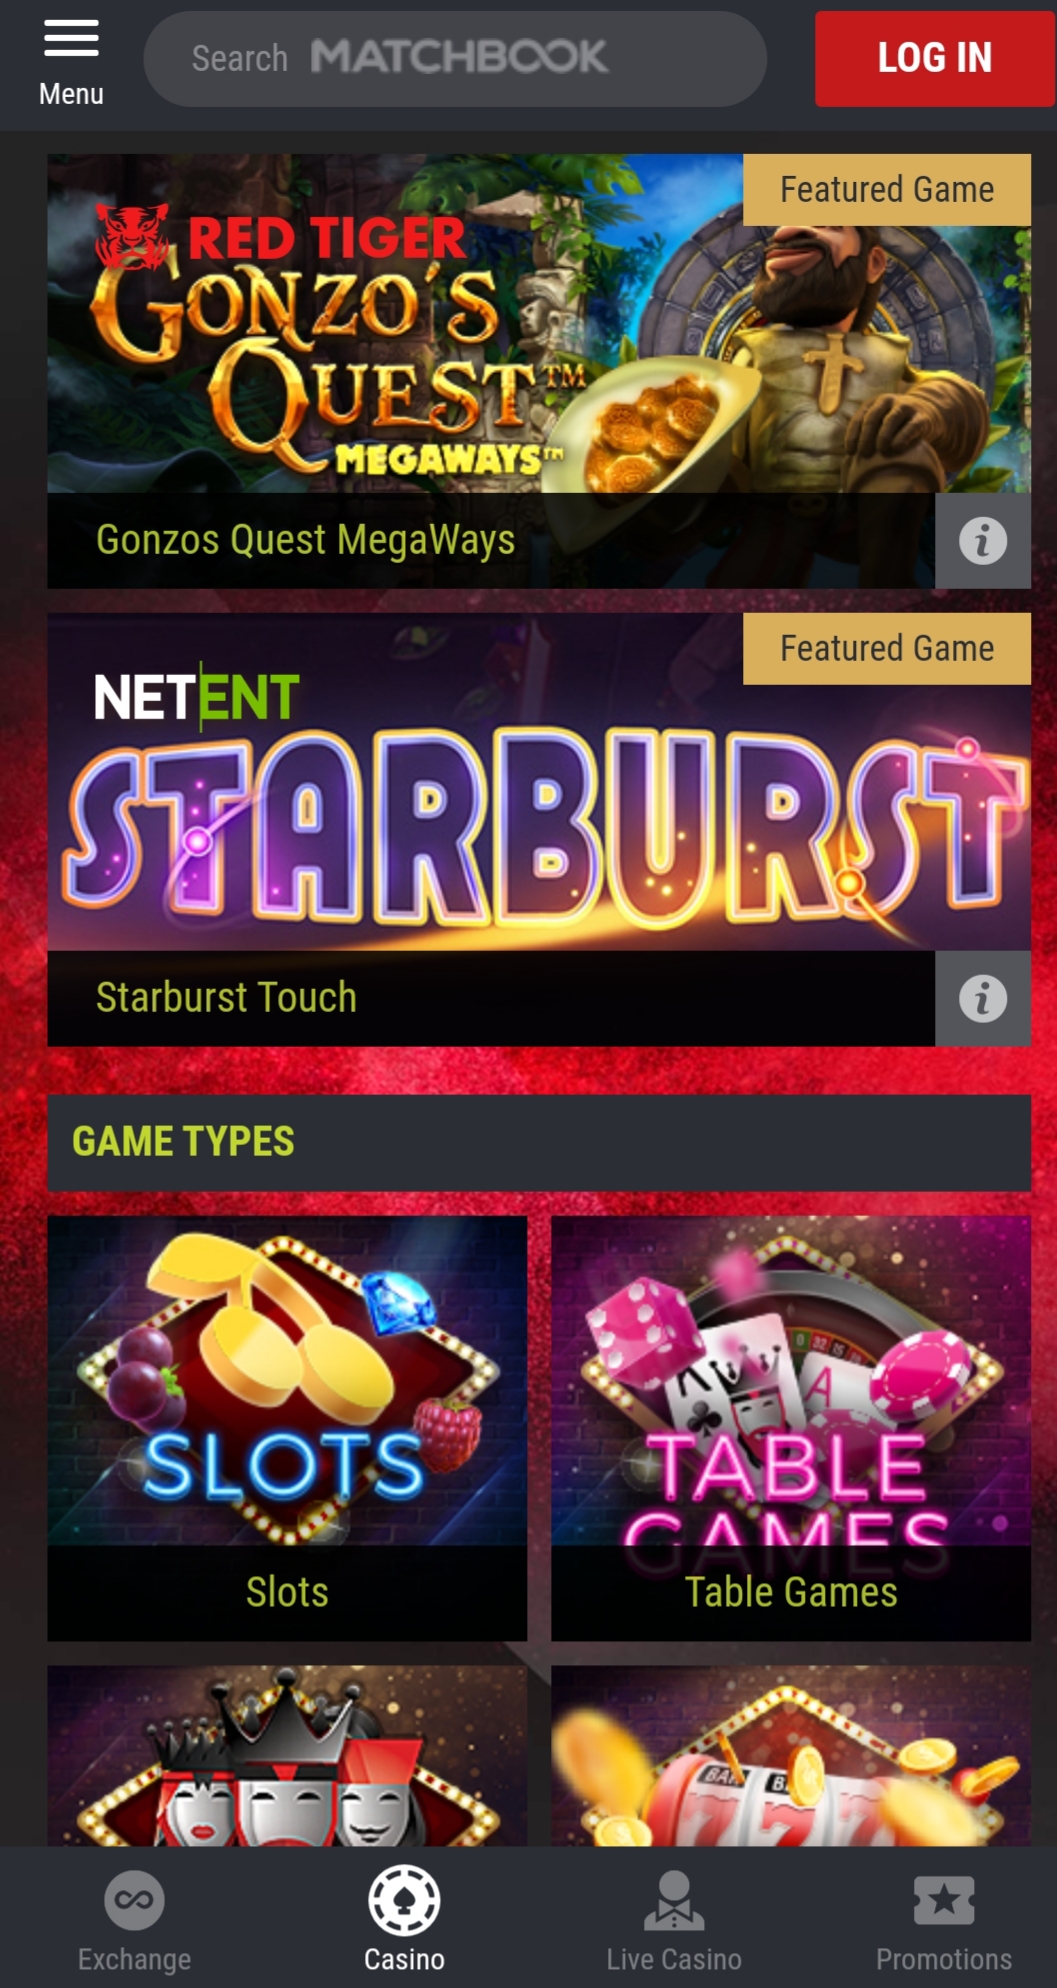 Matchbook Casino Mobile Games Review